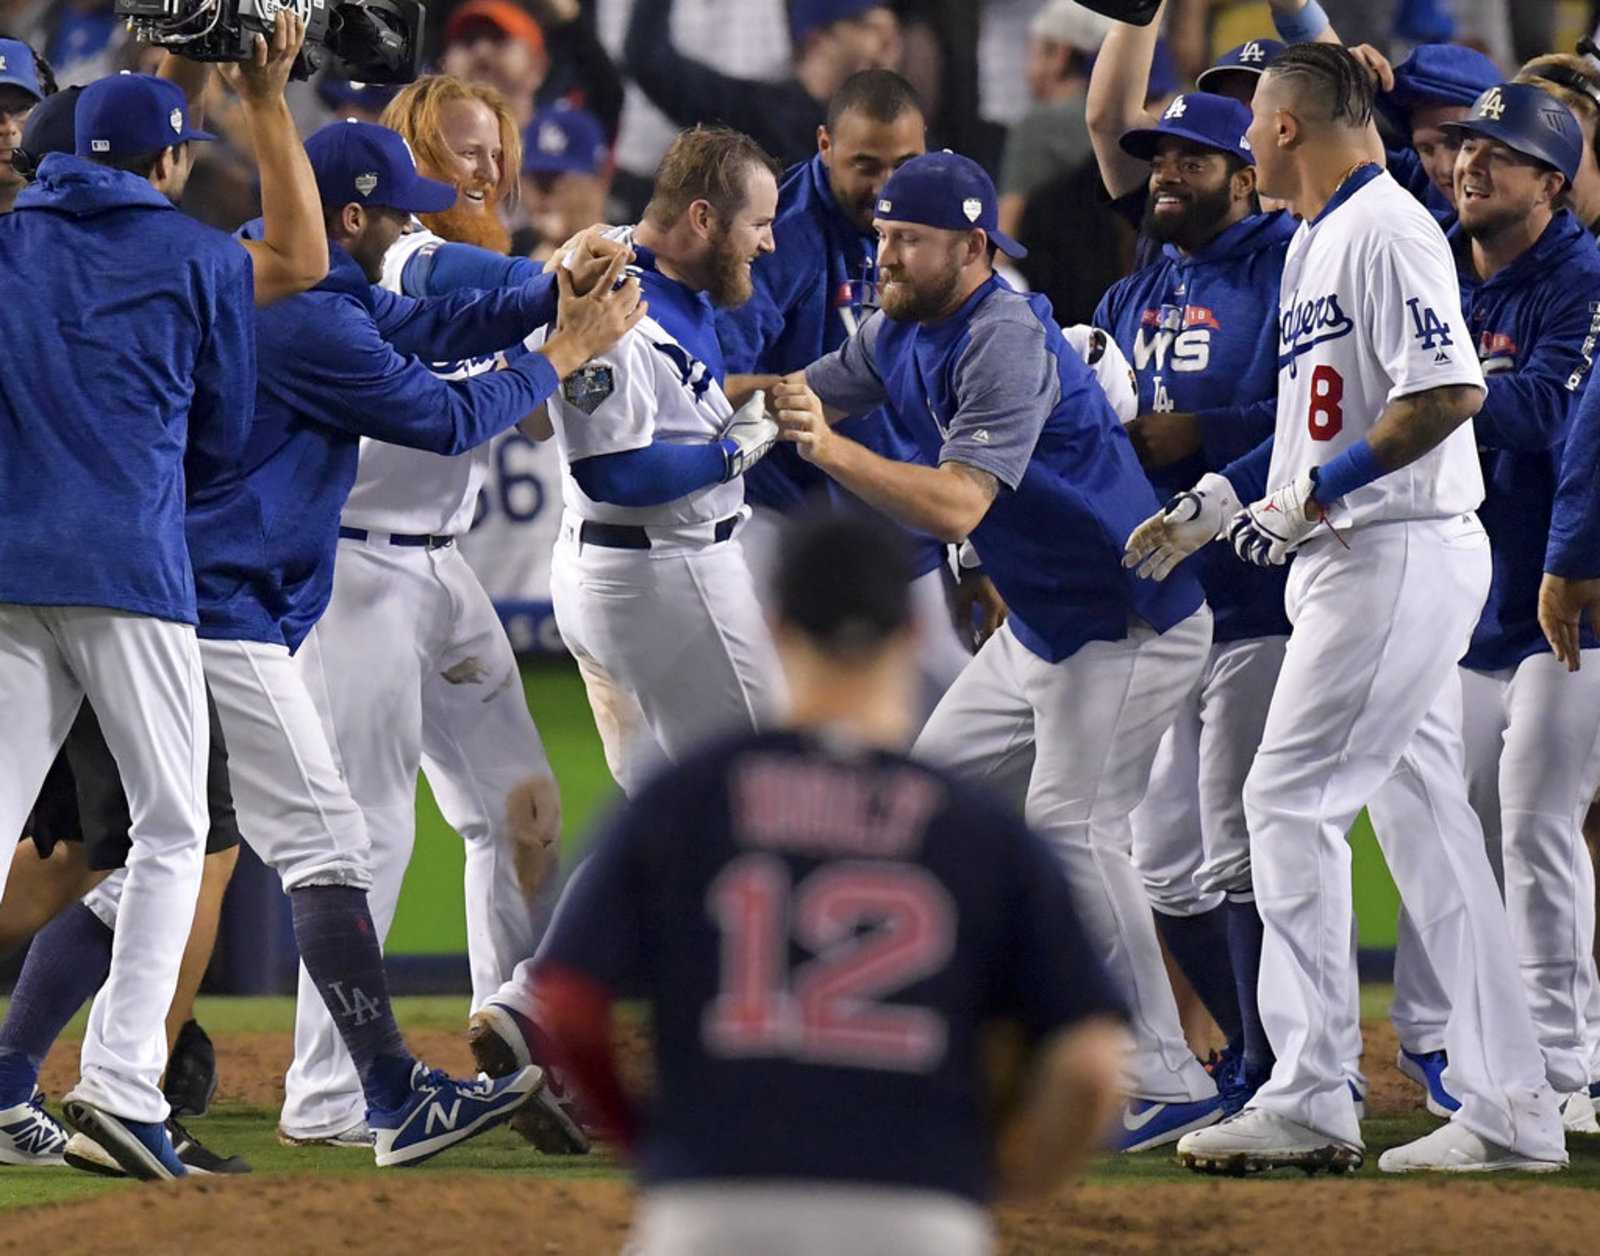 PHOTOS: Dodgers top Boston in 18th inning, longest Series game